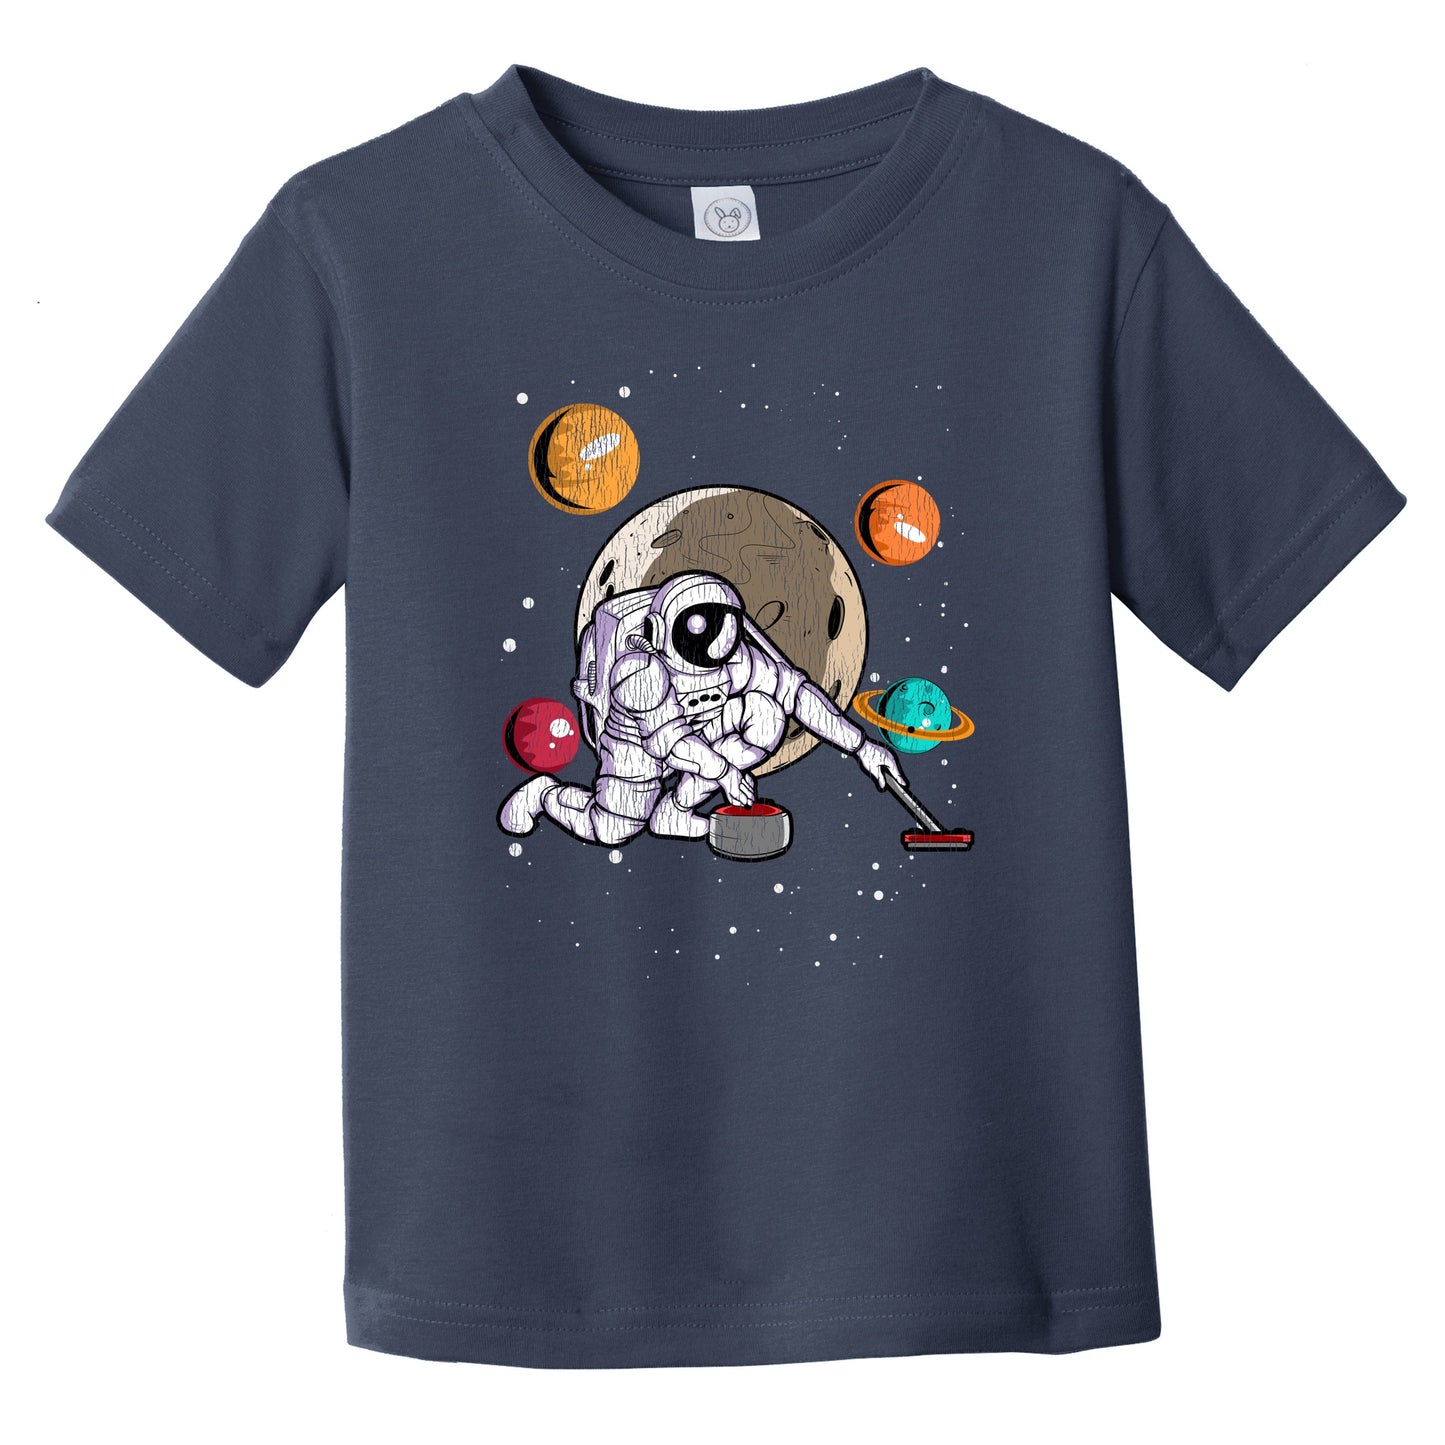 Curling Astronaut Outer Space Spaceman Distressed Infant Toddler T-Shirt